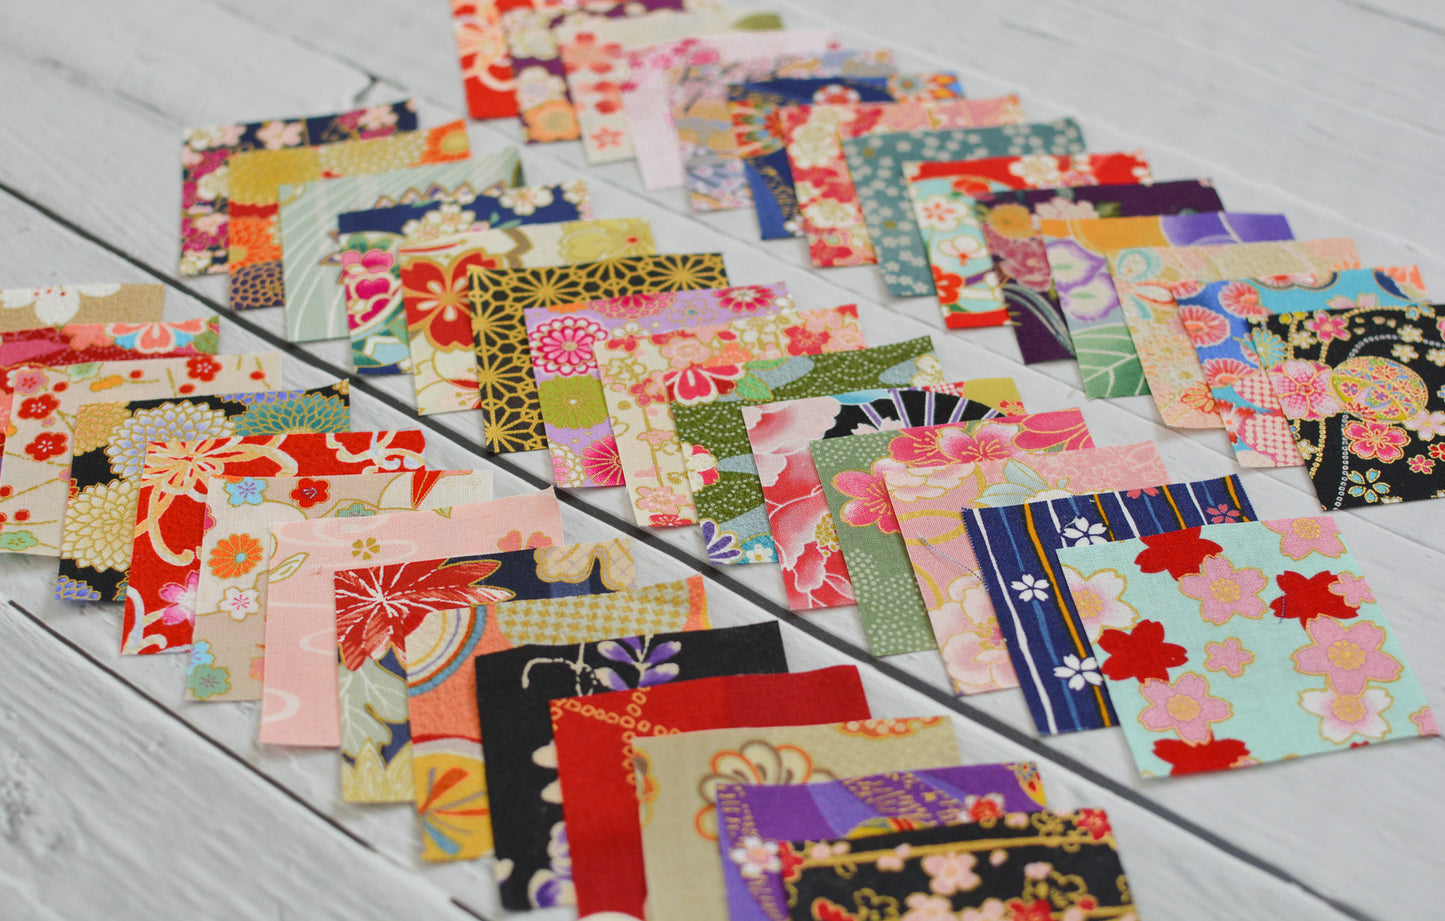 Japanese Fabric Mini Charm Pack 3" x 3" squares - 42 pieces assortment of all different prints